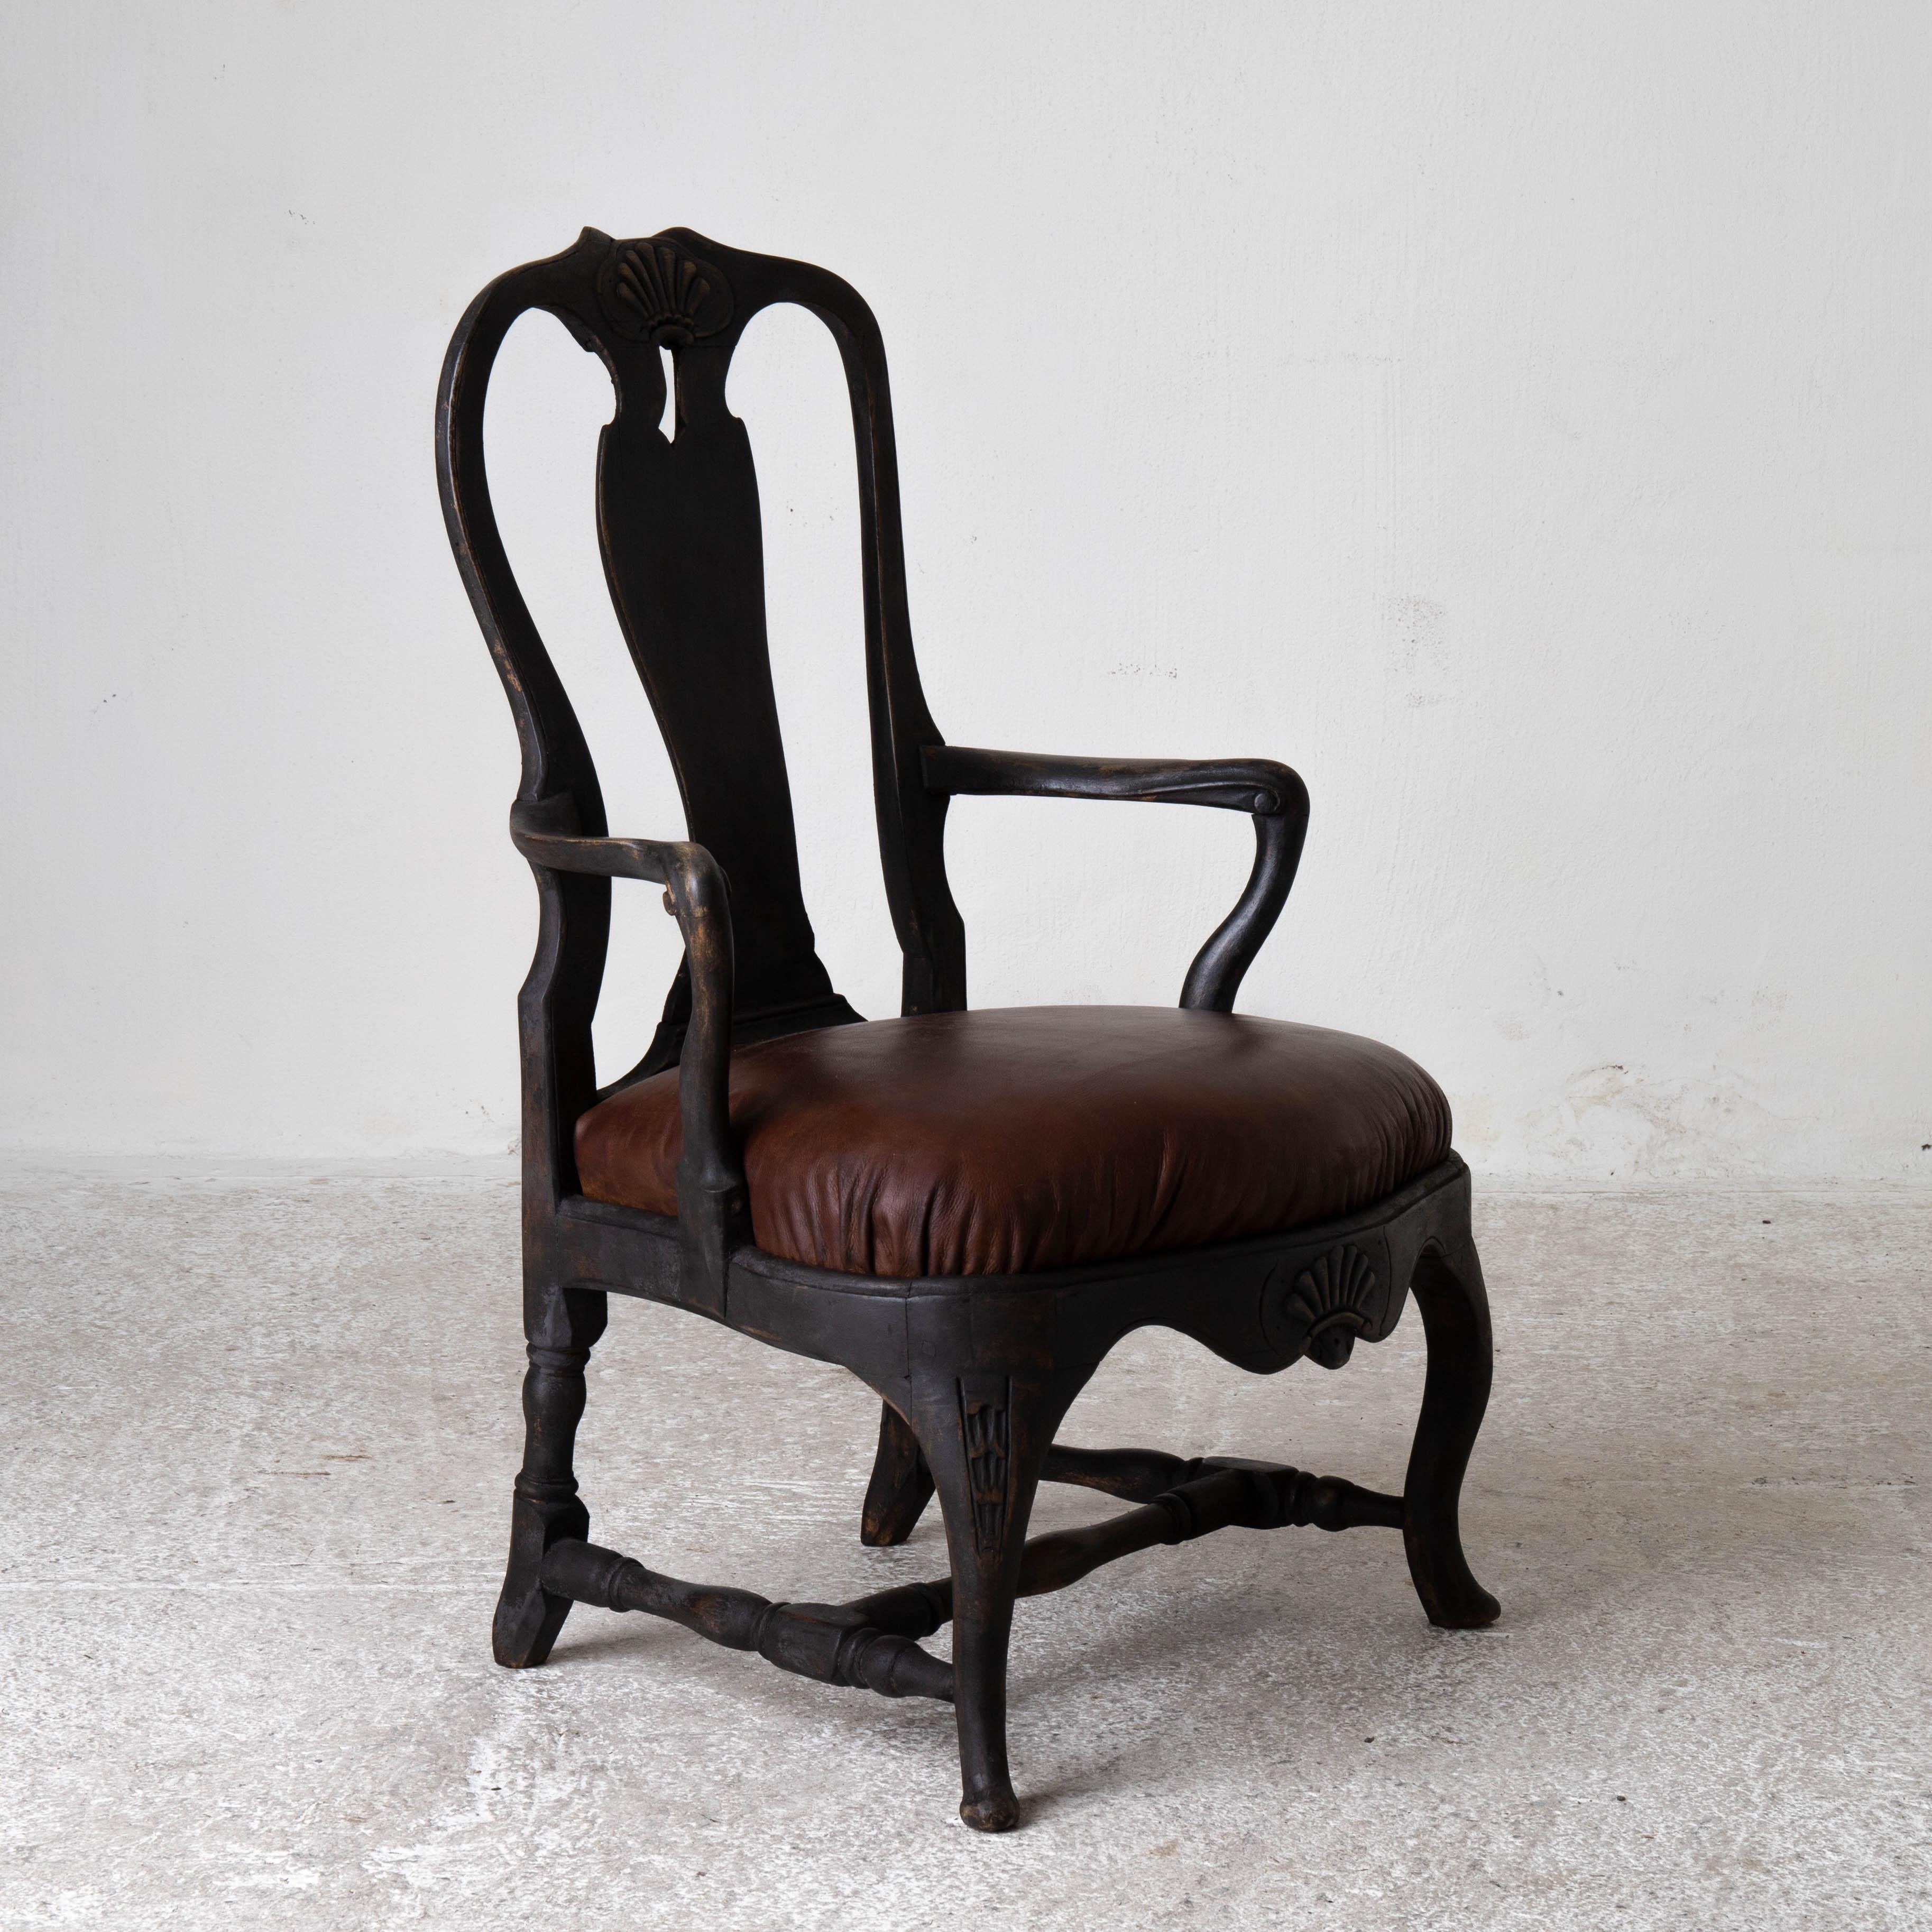 Chair Armchair Swedish Rococo 1750-1775 Black Sweden For Sale 6